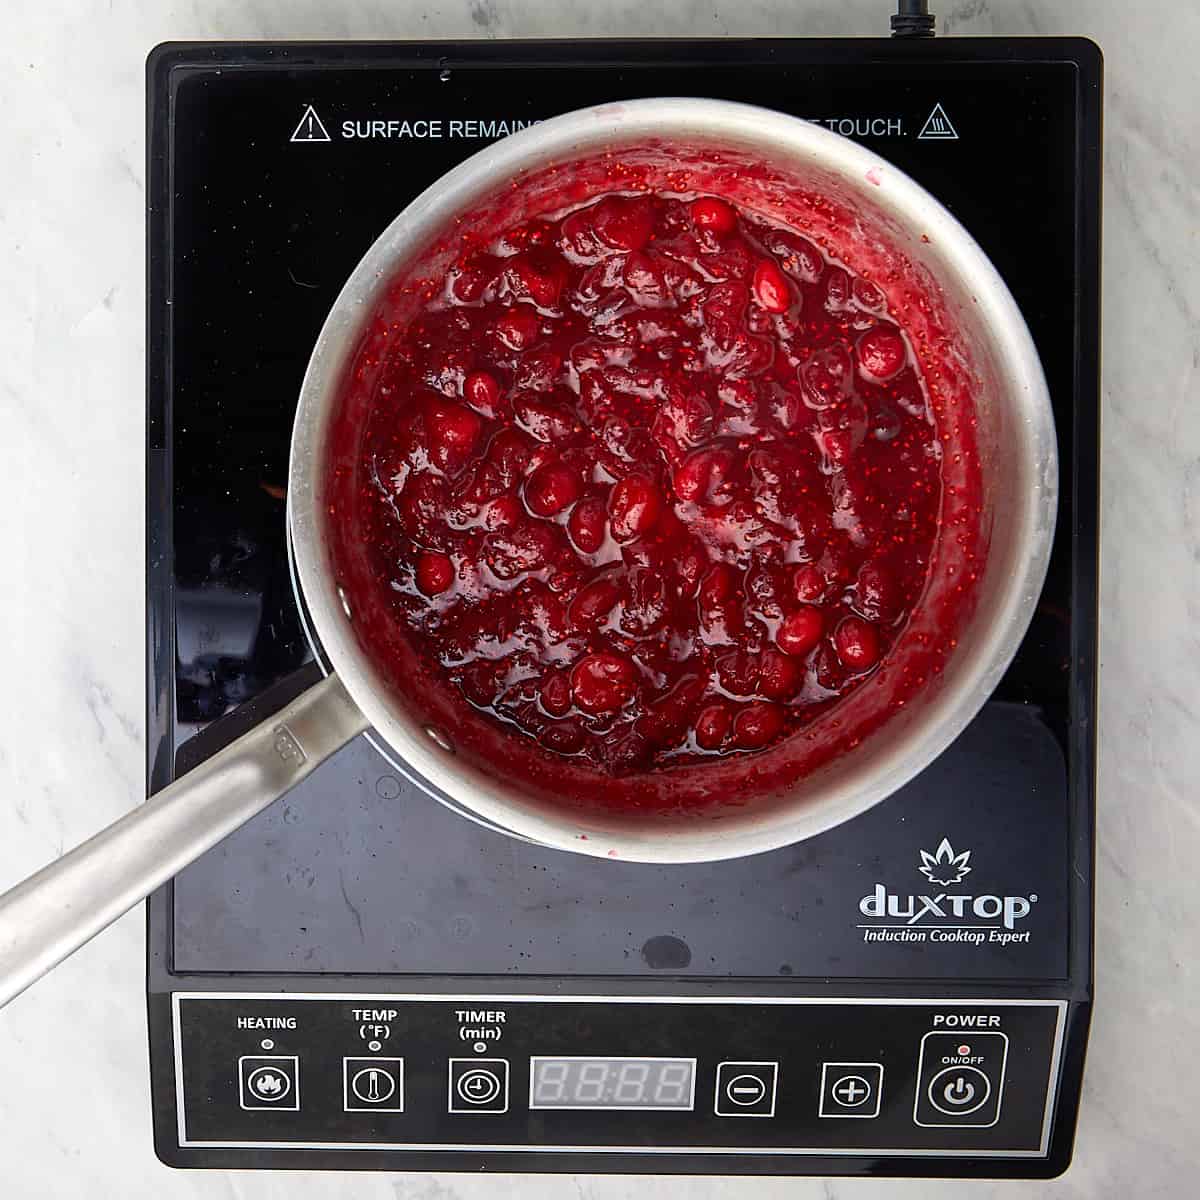 cranberry sauce simmering in a saucepan